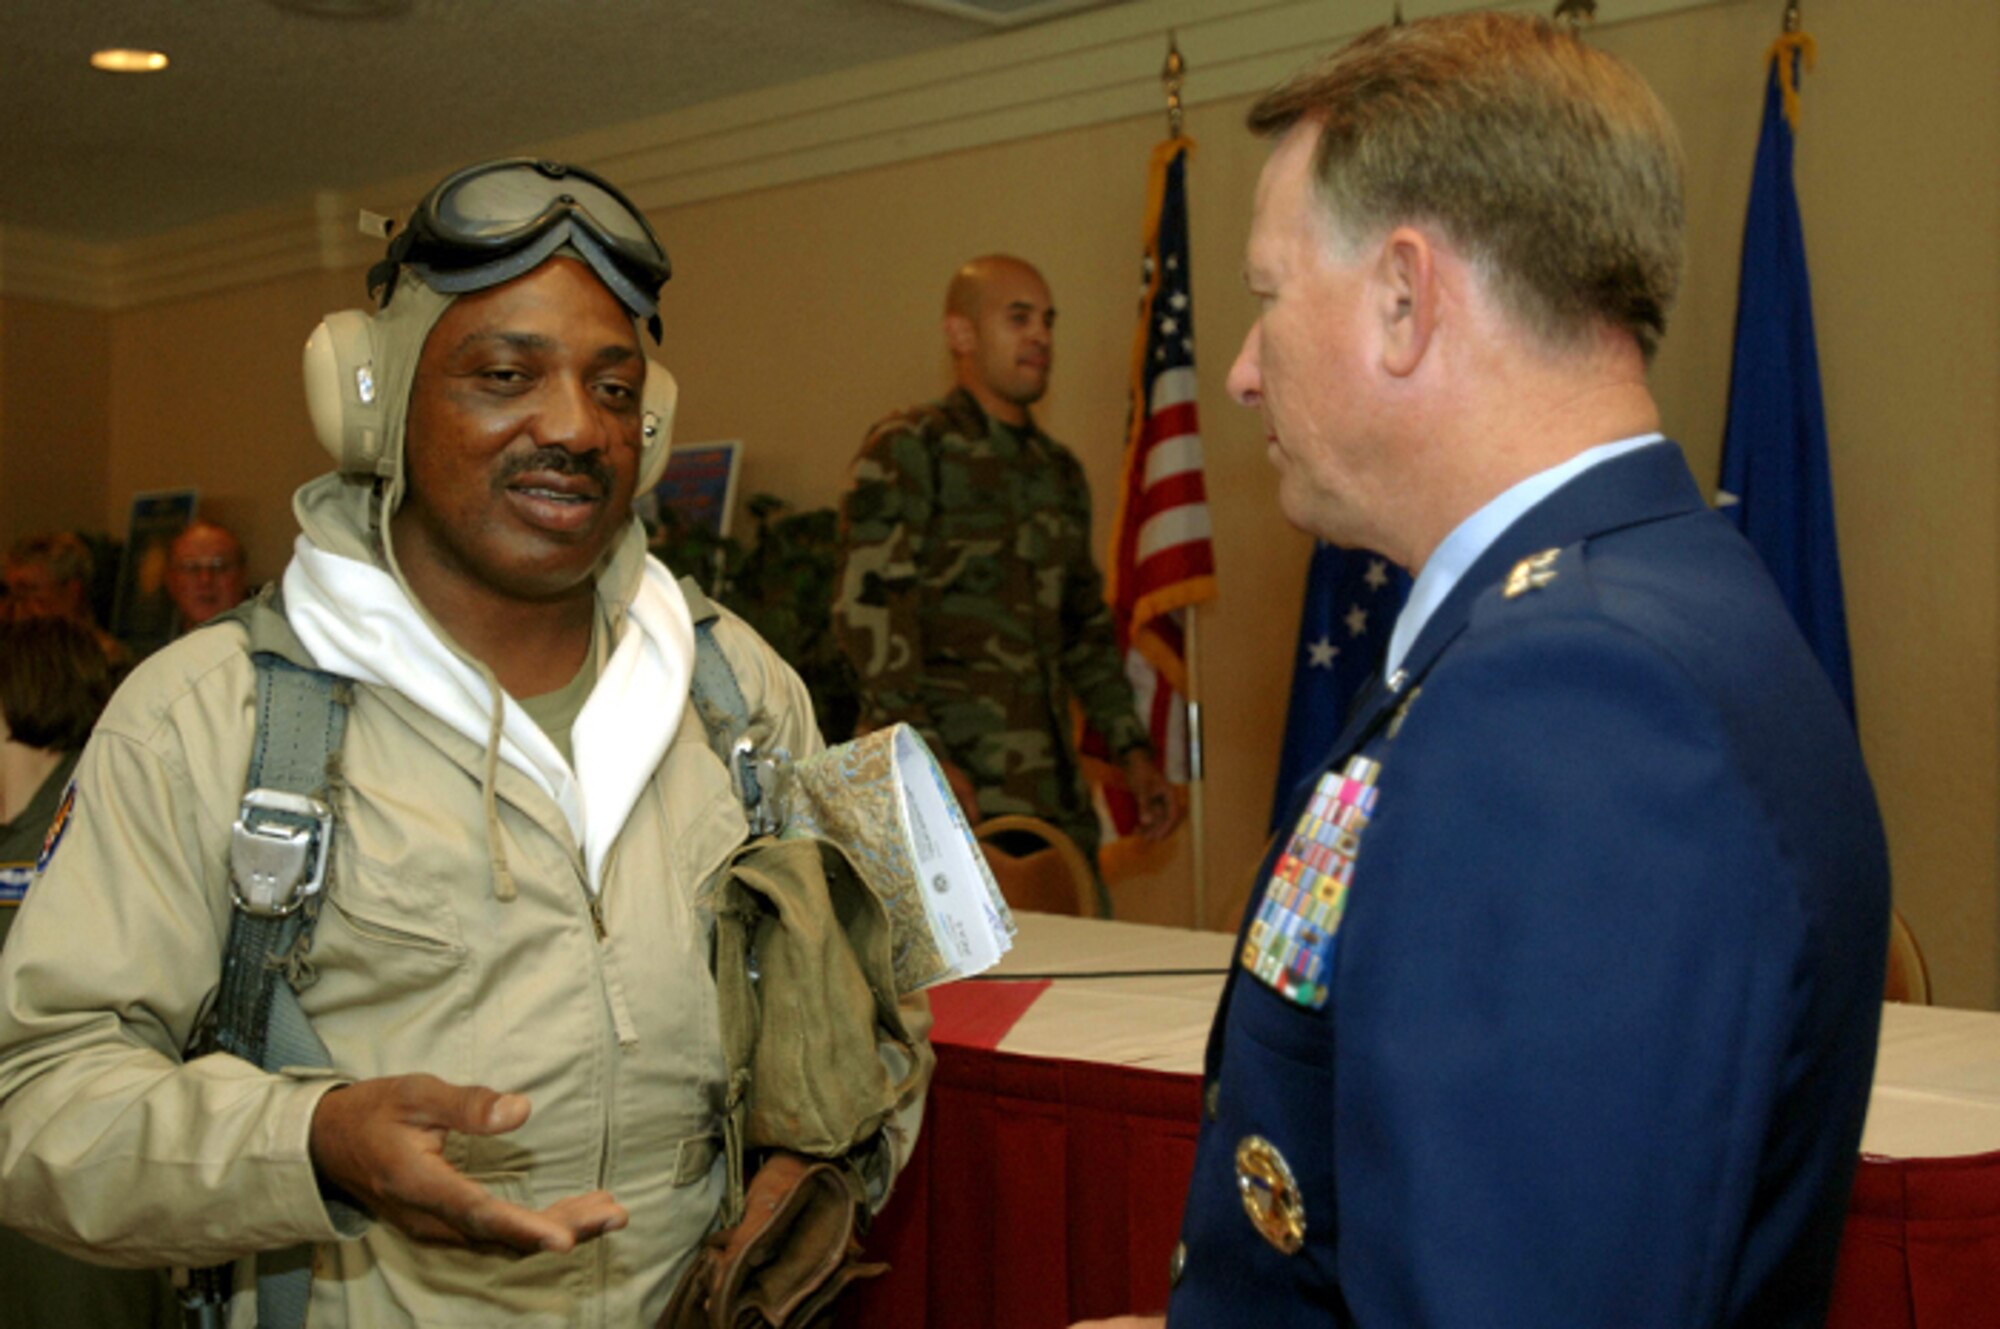 Master Sgt. Michael Varnado from the 94th Airlift Wing, Dobbins Air Reserve Base, Ga., chats with Lt. Gen. John A. Bradley, Air Force Reserve Command commander, during a break at the AFRC Human Resources Development Council workshop in Colorado Springs on Oct. 27, 2006. Sergeant Varnado was wearing a vintage uniform to support the workshop's theme, Remembering our Heritage. (U.S Air Force photo/Staff Sergeant Joselito Aribuabo).
